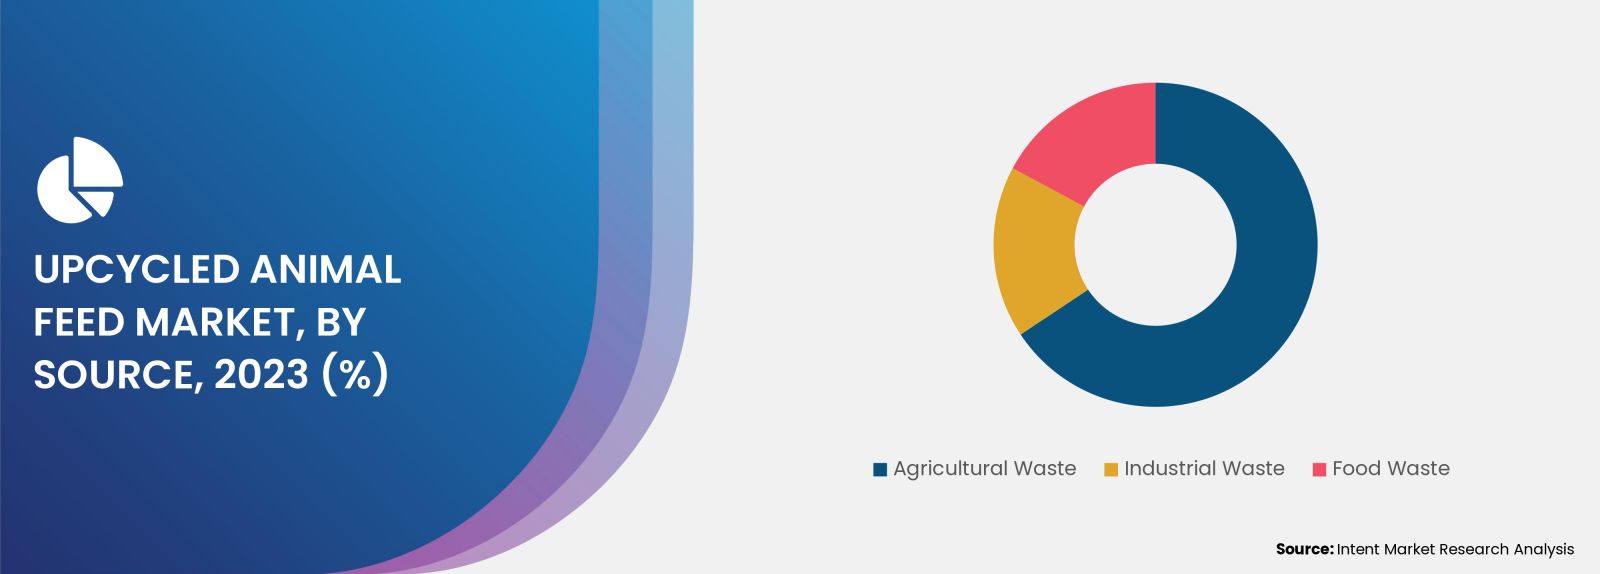 Driving the Agricultural Waste Segment